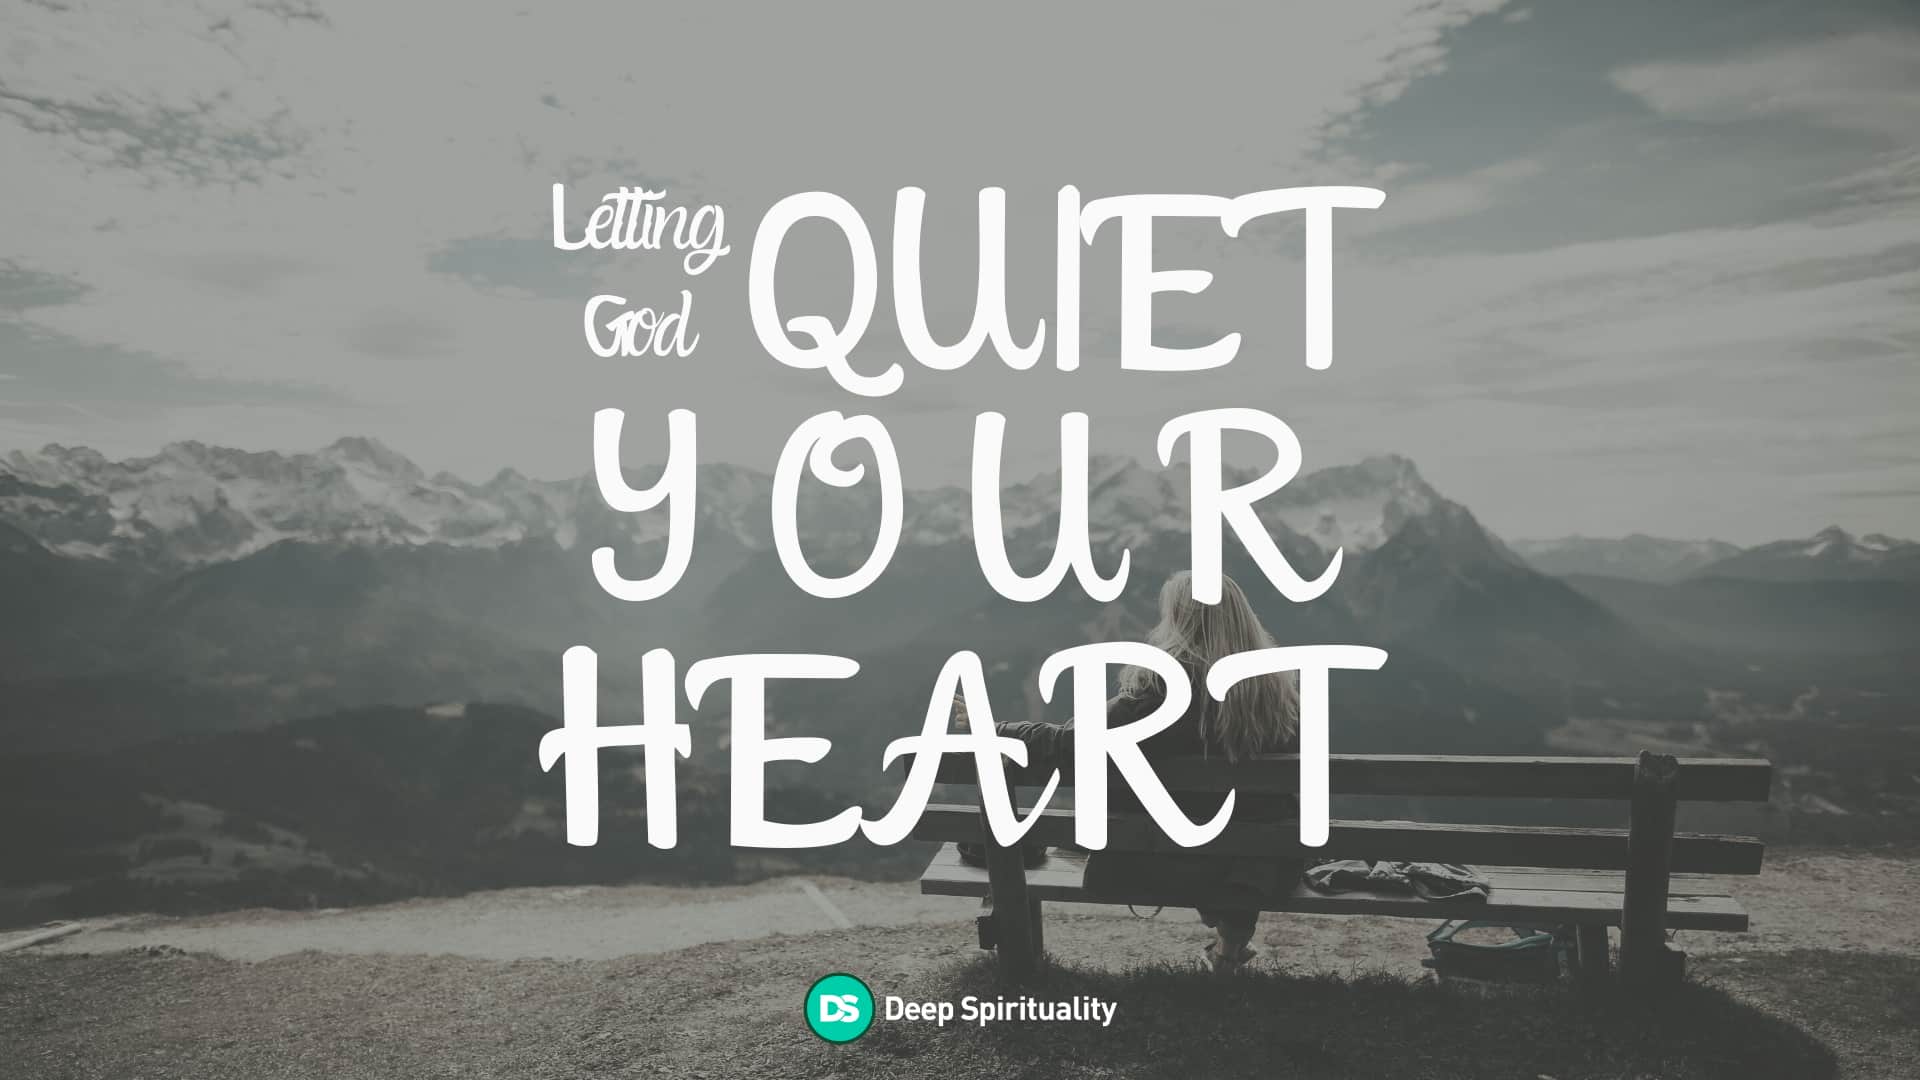 The Ultimate Guide to Letting God Quiet Your Heart 4